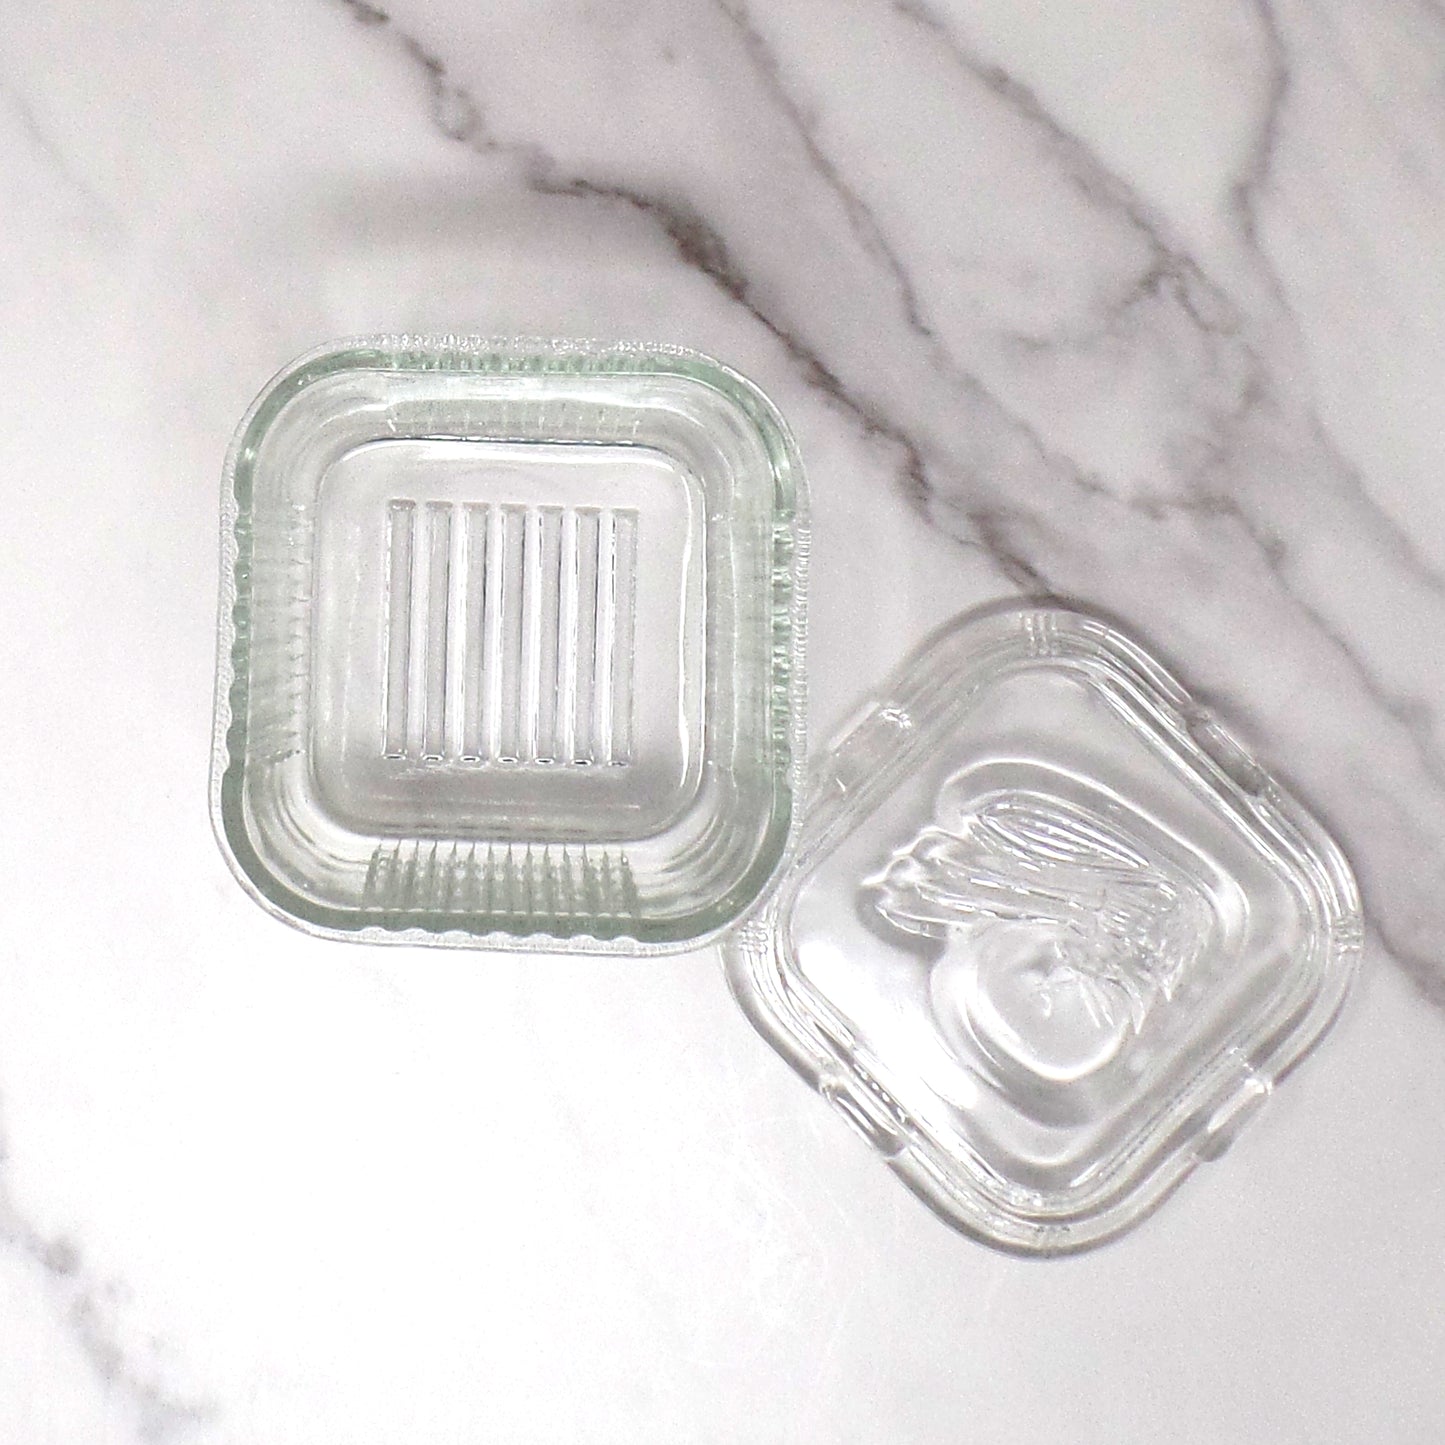 Vintage Federal Glass Refrigerator Dish - Ribbed Sides with Vegetables on Lid (1950s)